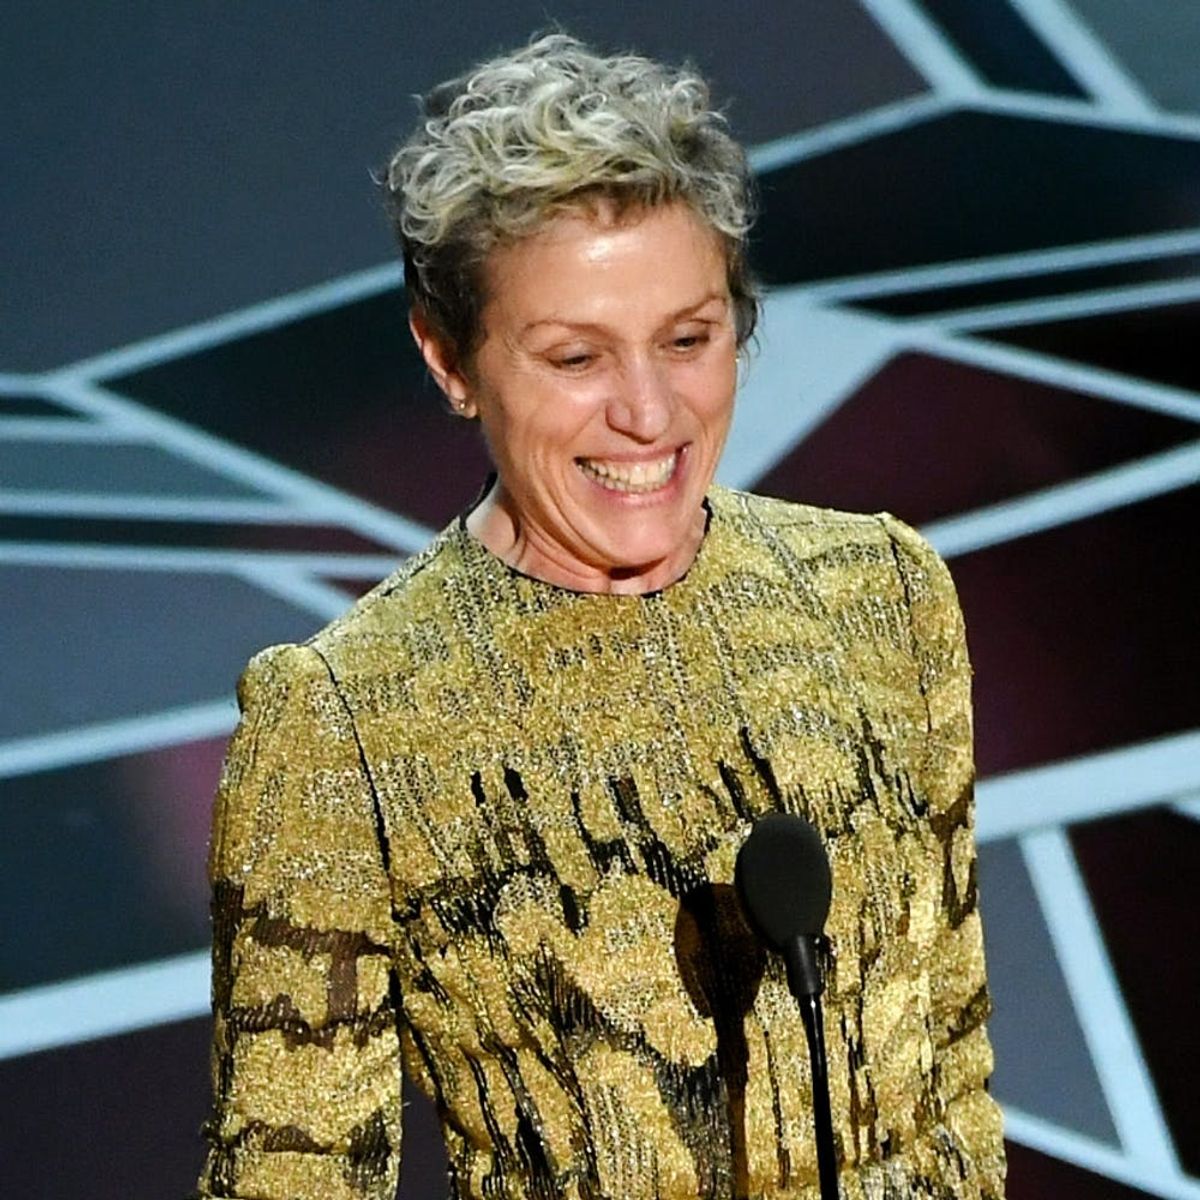 Oscars 2018: Frances McDormand Ended Her Best Actress Acceptance Speech With Two Important Words